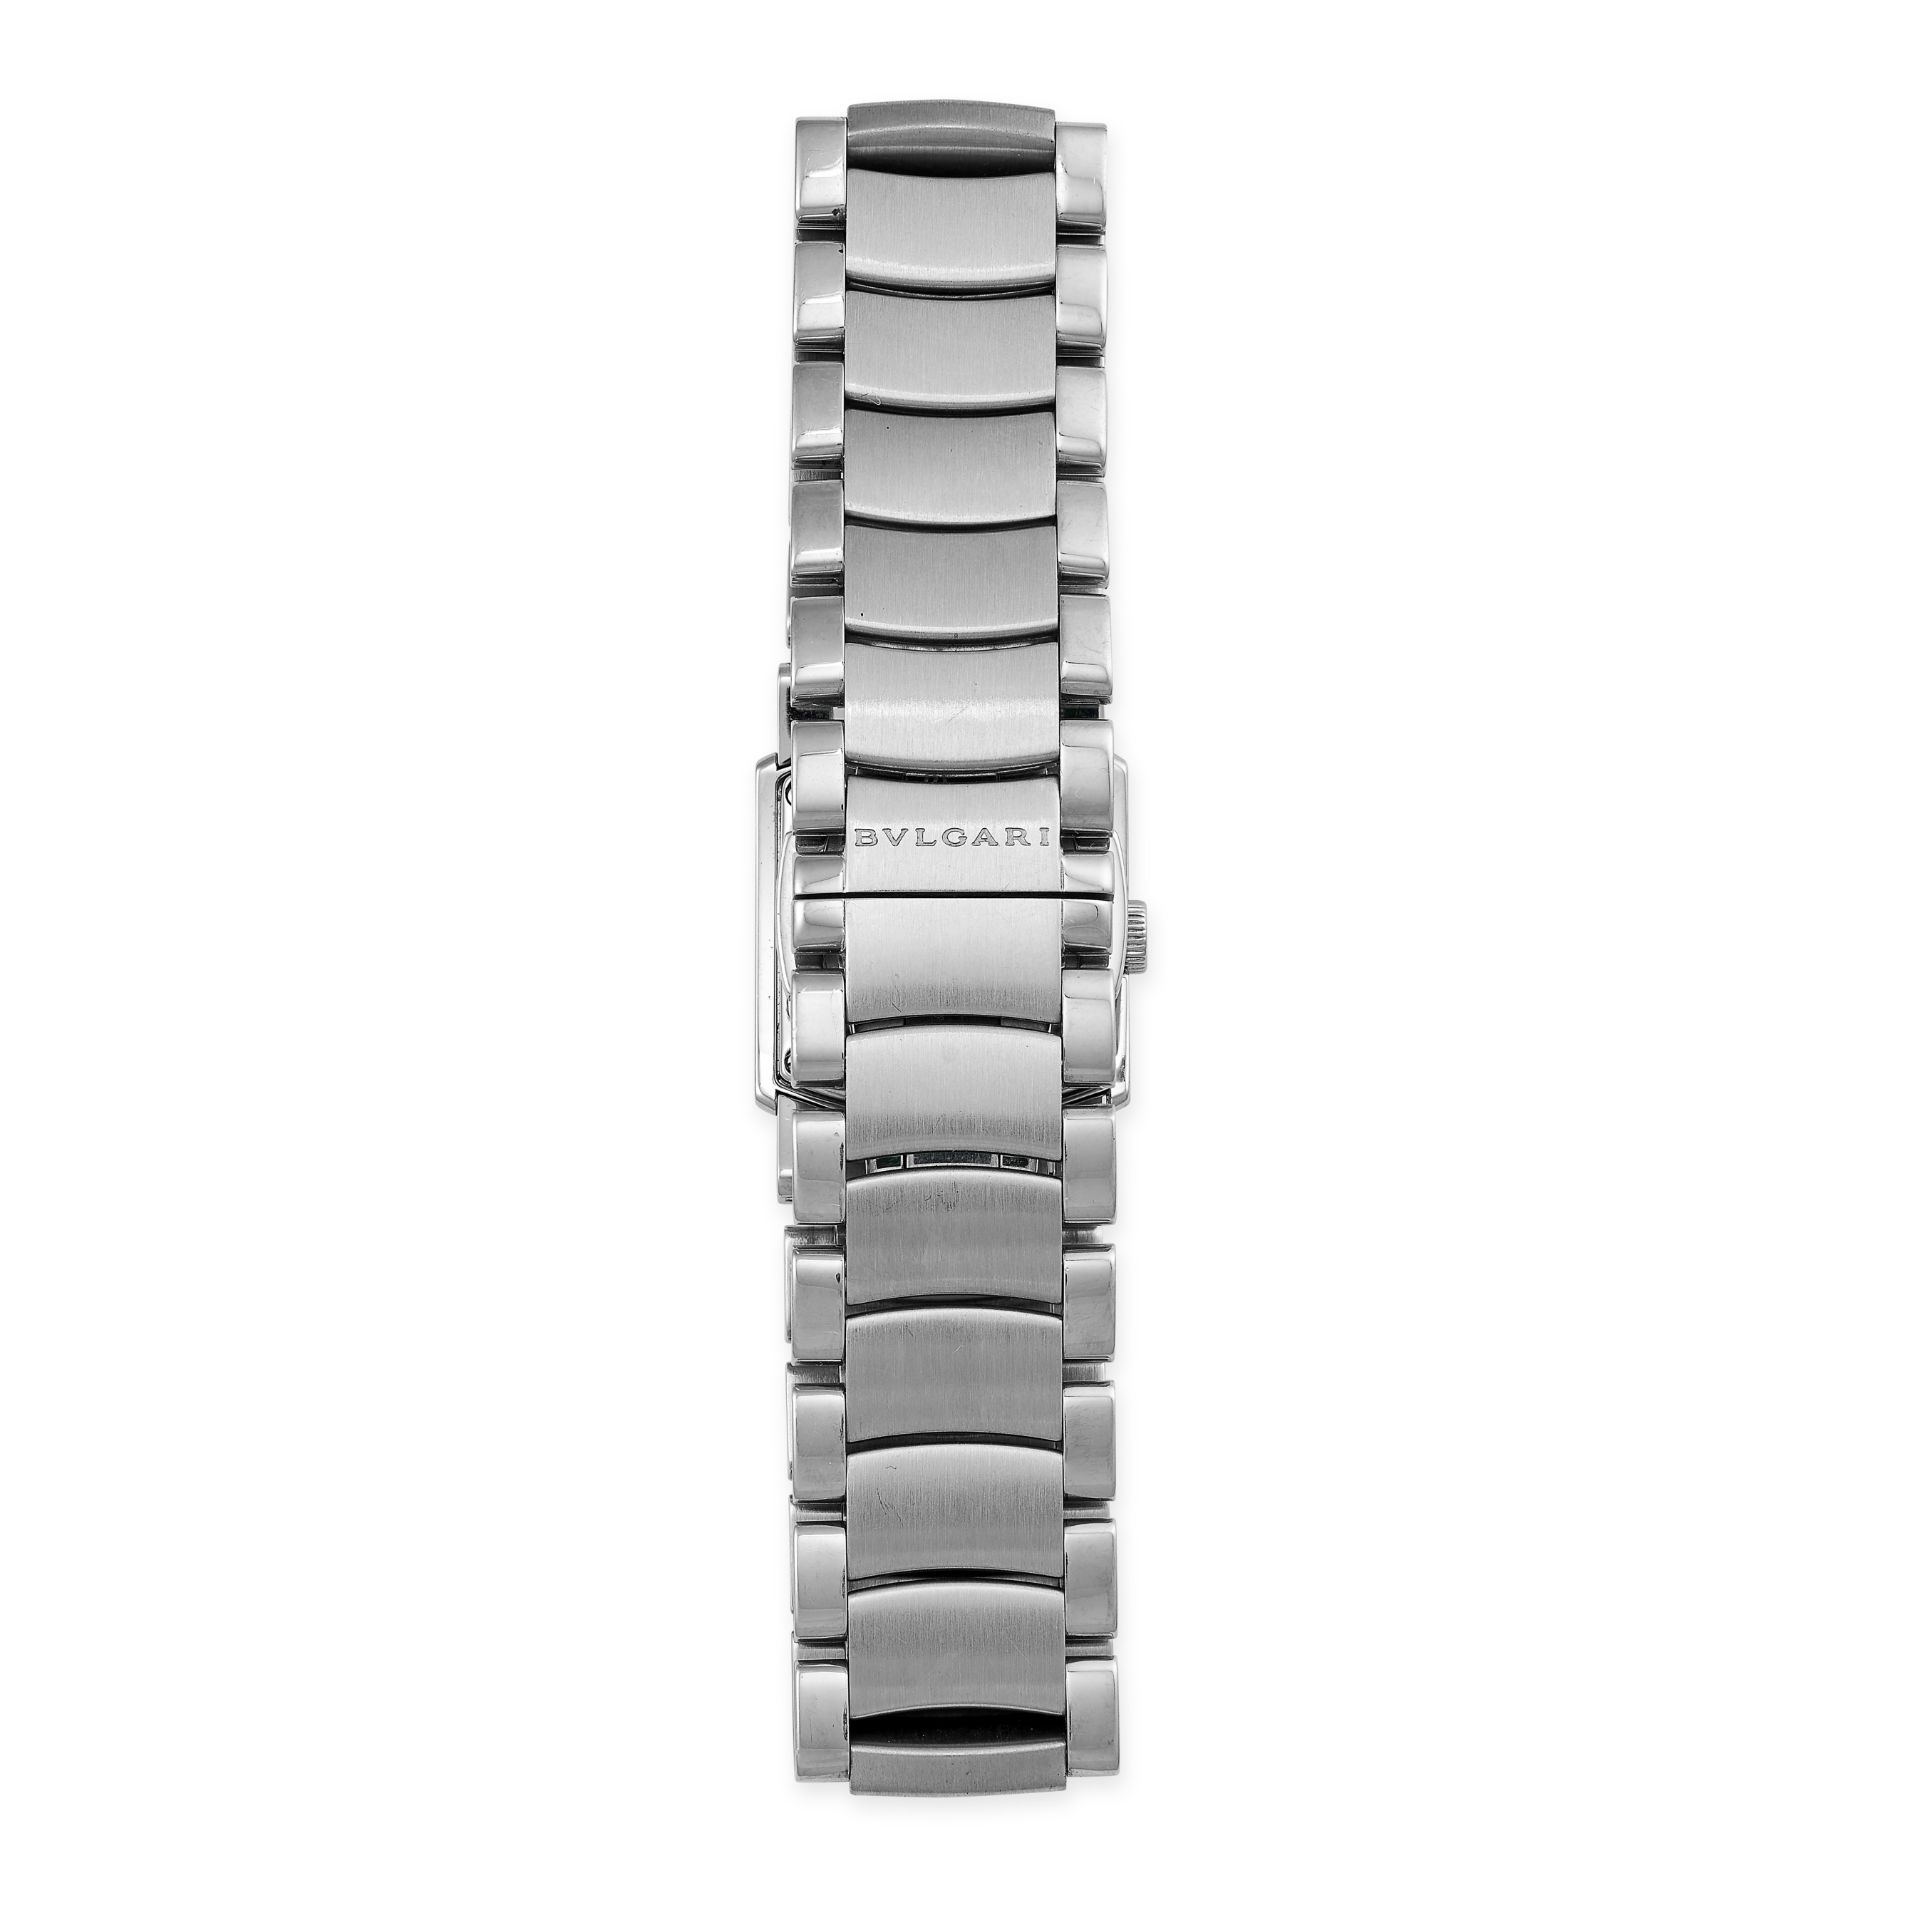 BULGARI, A LADIES ASSIOMA D DIAMOND WRISTWATCH, in stainless steel, black pyramid dial with appli... - Image 2 of 2